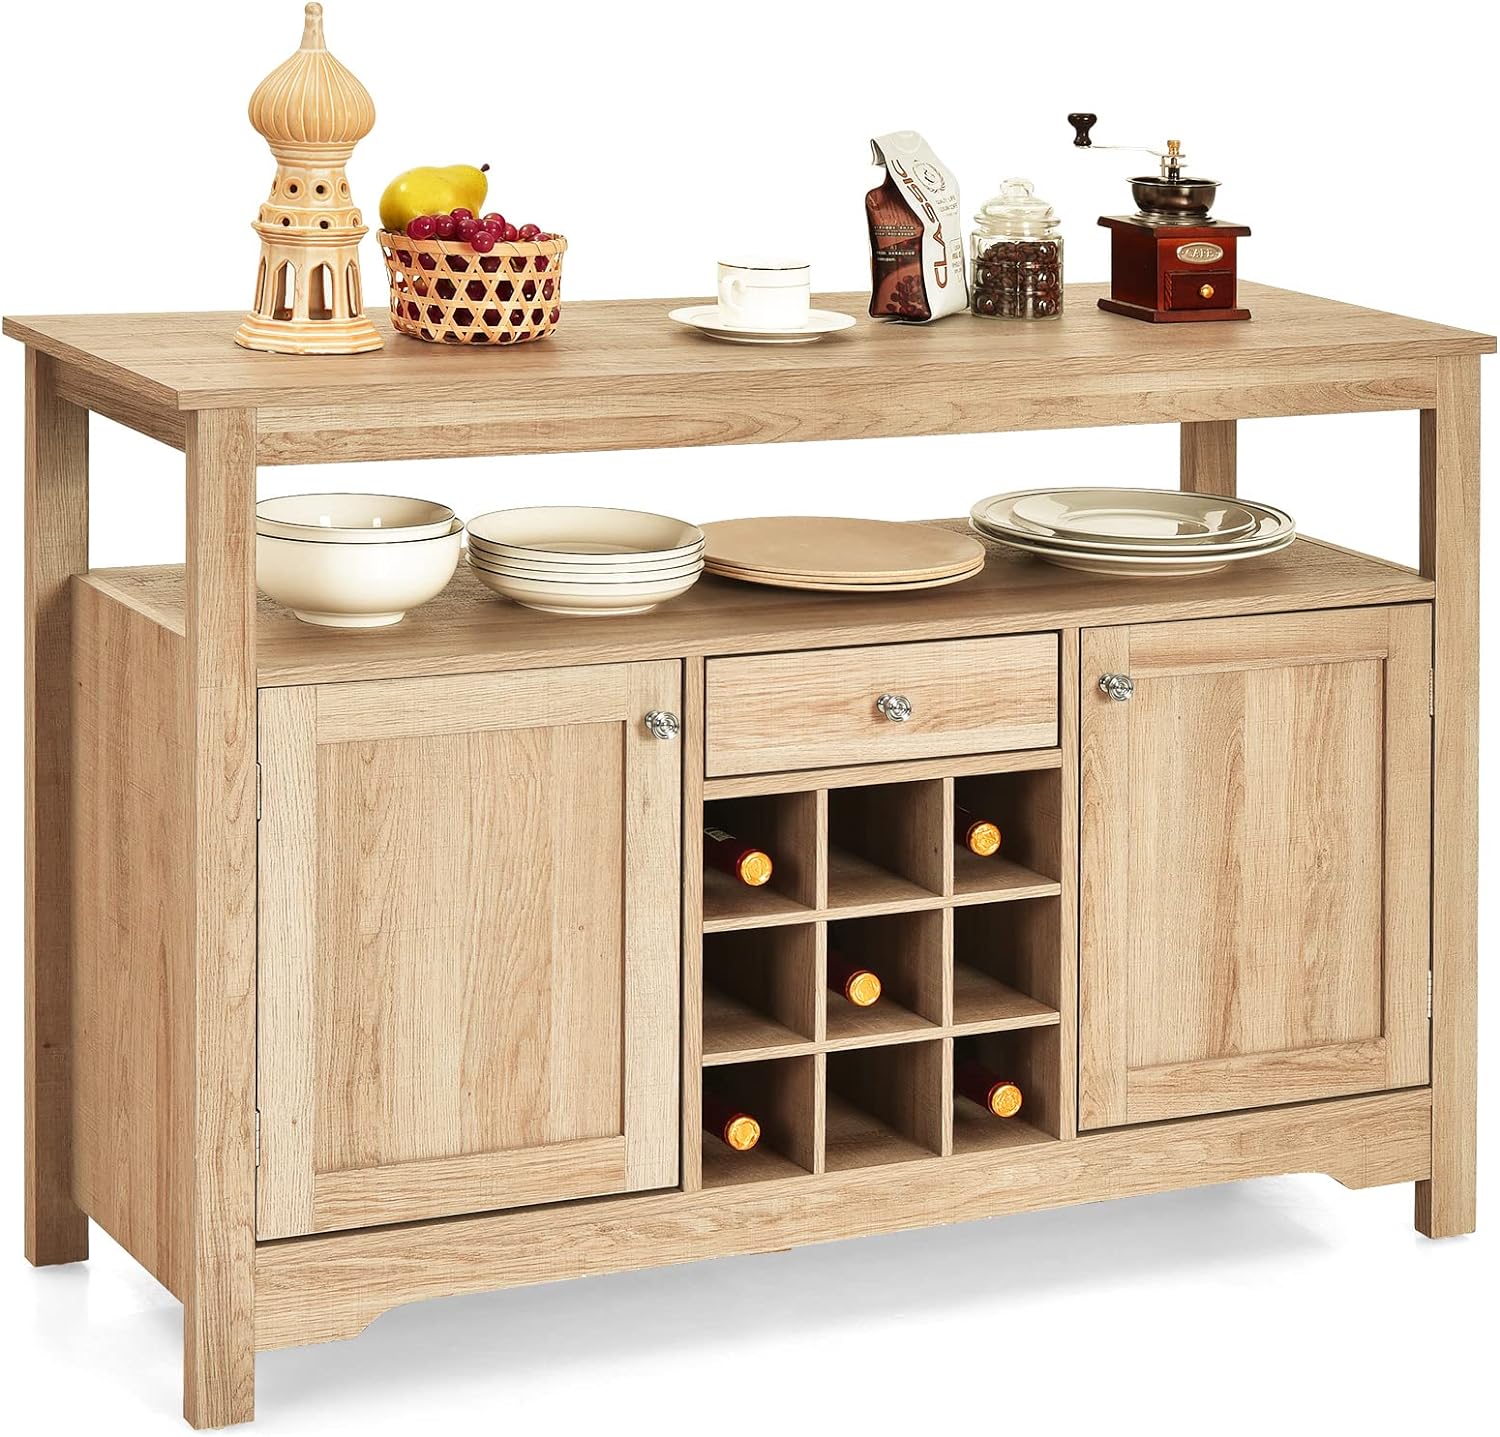 COSTWAY Buffet Cabinet Storage Sideboard, Server Console Table, Kitchen Cupboard Table with 2 Cabinets, Wine Rack & Open Shelf, 46 x 16 x 31.5 inches, Coffee Bar Cabinet for Entryway, Living Room